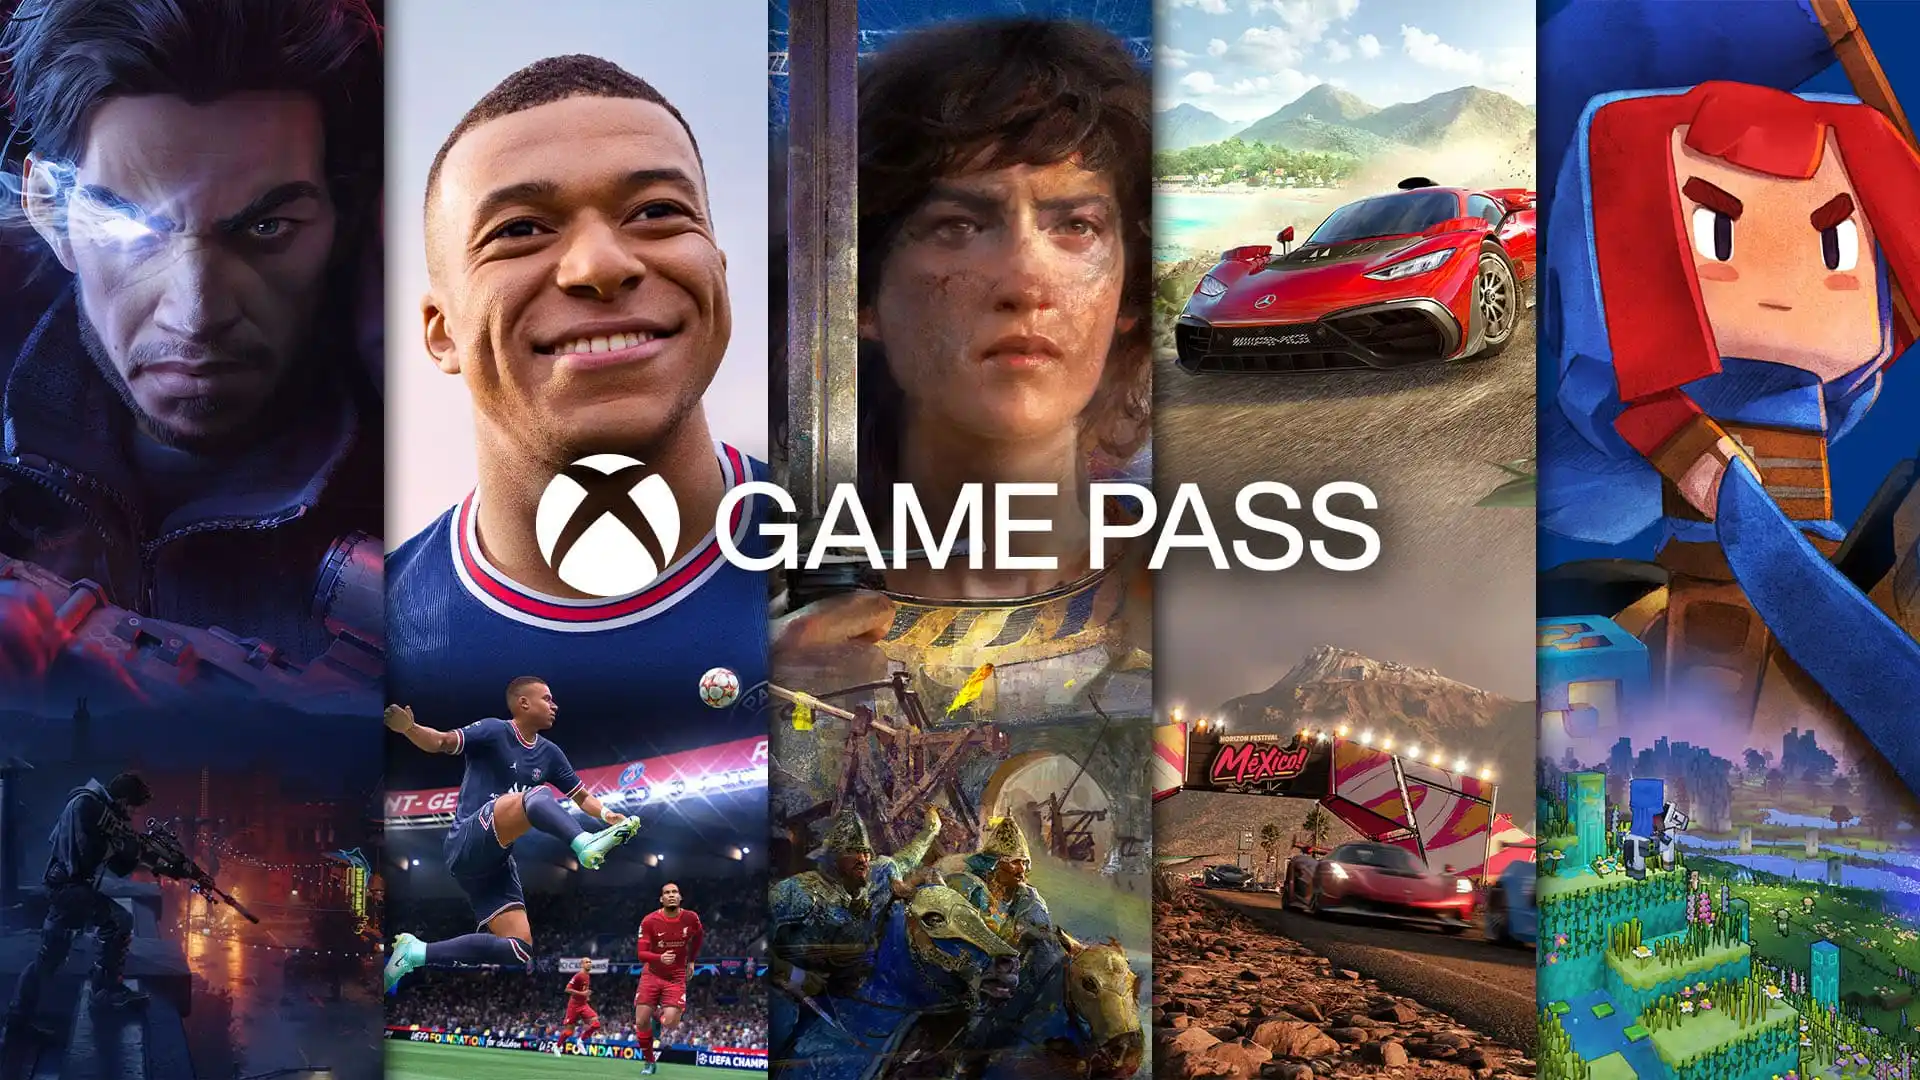 Microsoft’s Game Pass Strategy: Aiming for Universal Reach